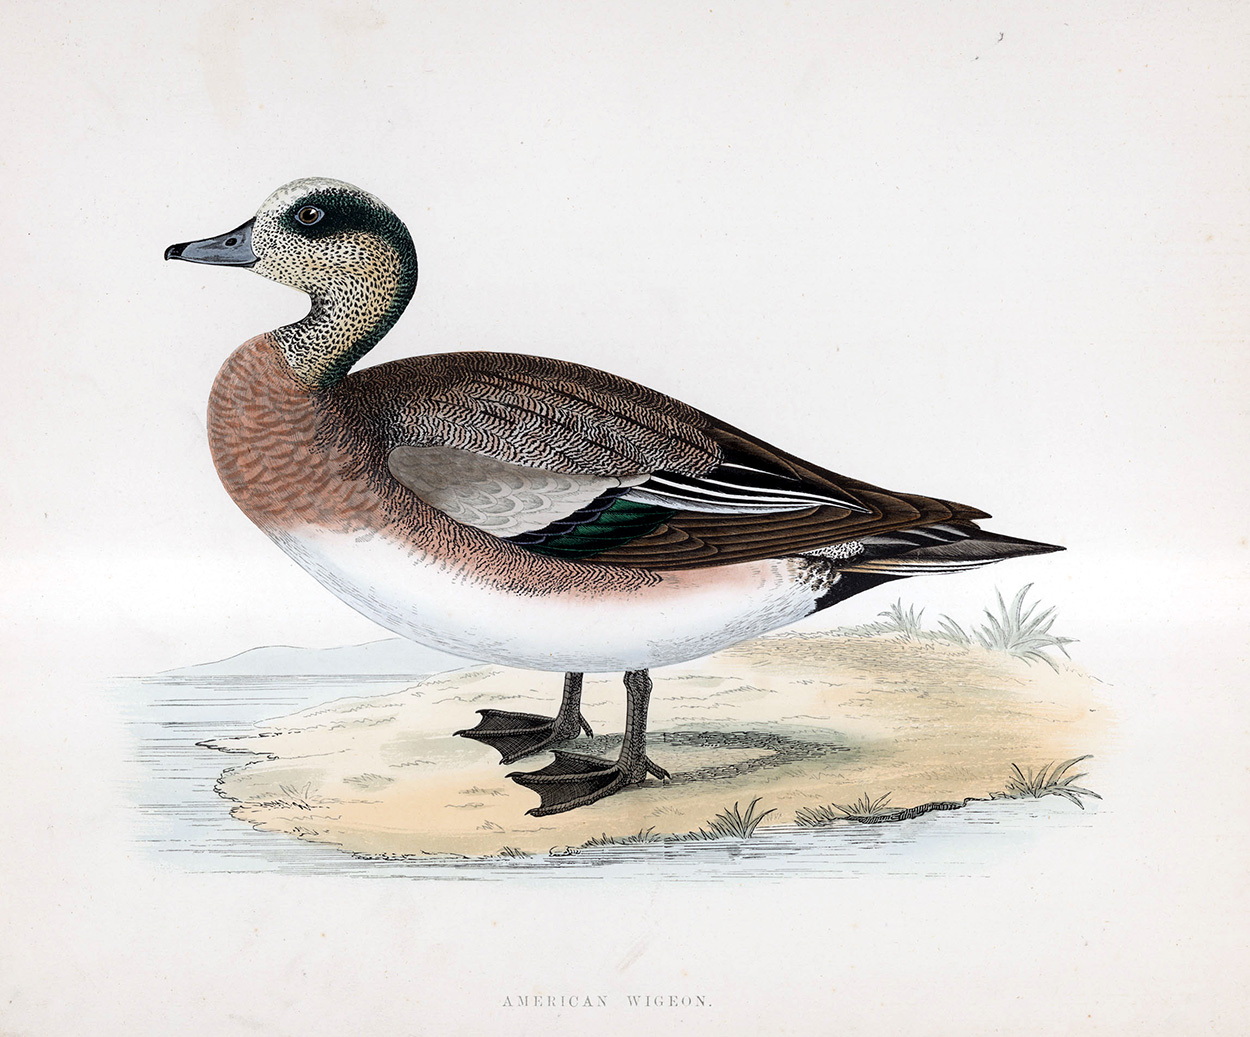 American Wigeon - hand coloured lithograph 1891 (Print) art by Beverley R Morris Art at The Illustration Art Gallery